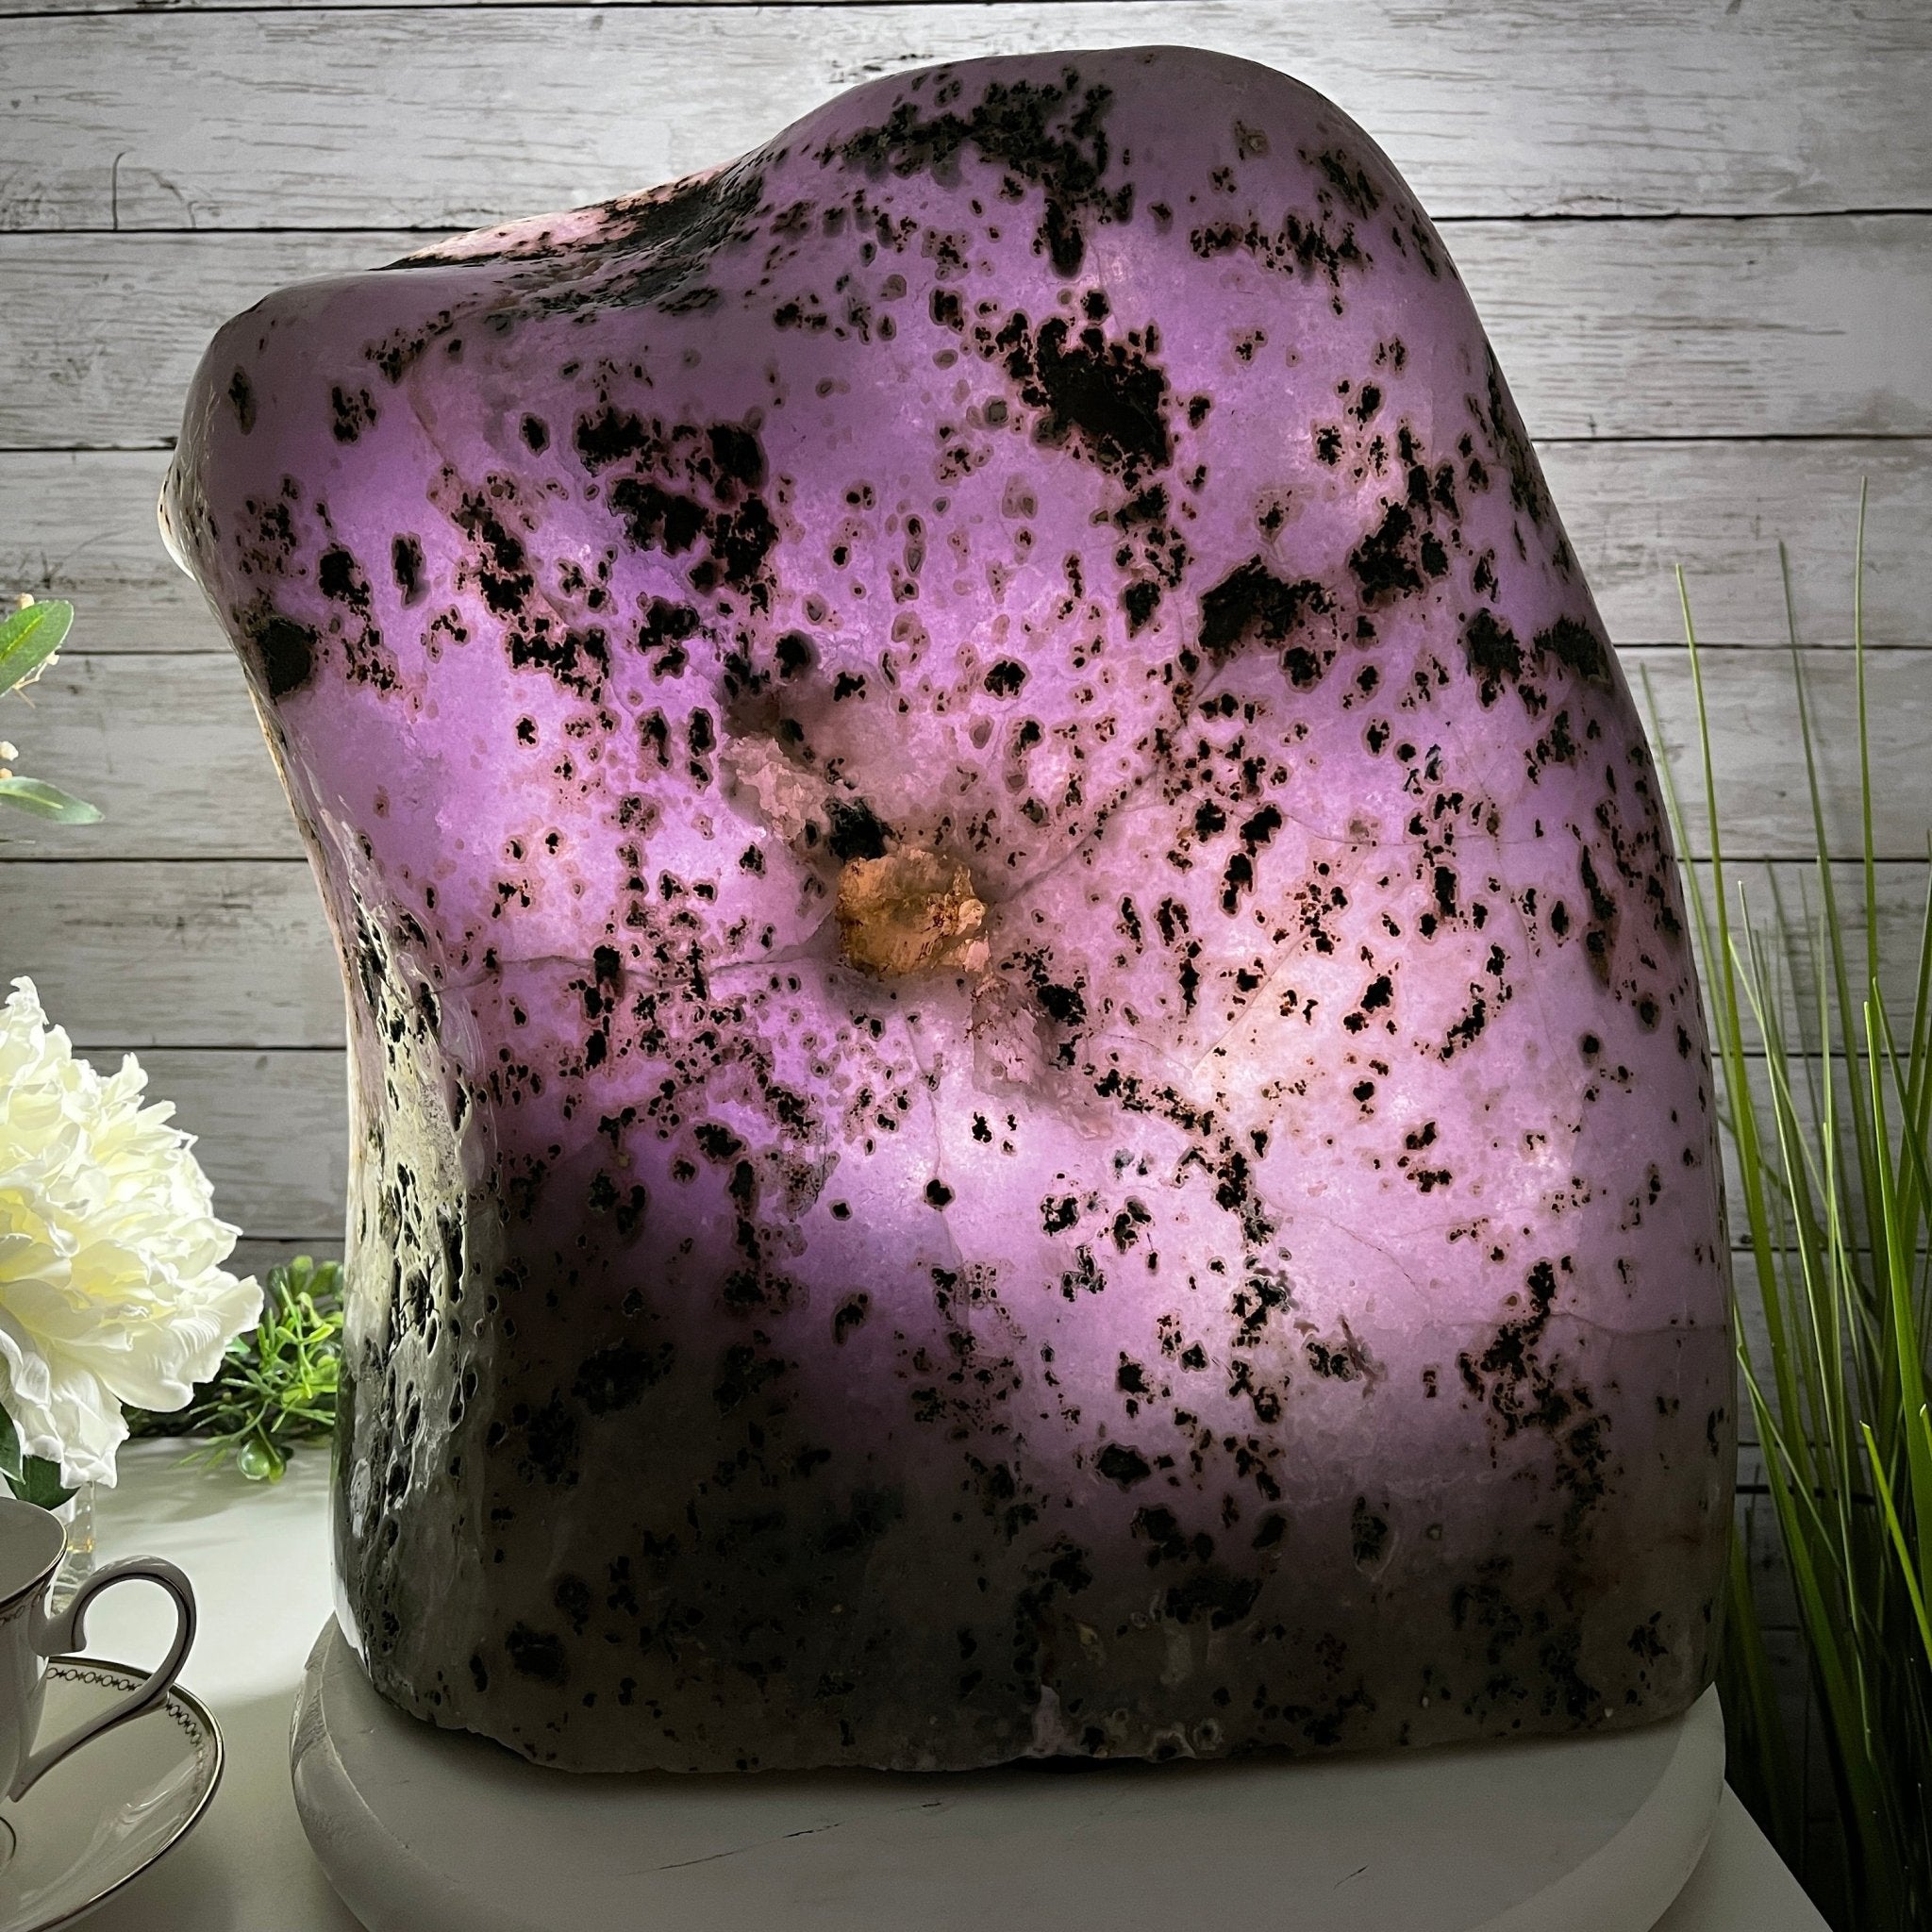 Extra Quality Polished Brazilian Amethyst Cathedral, 80.9 lbs & 15.5" tall Model #5602-0105 by Brazil Gems - Brazil GemsBrazil GemsExtra Quality Polished Brazilian Amethyst Cathedral, 80.9 lbs & 15.5" tall Model #5602-0105 by Brazil GemsPolished Cathedrals5602-0105